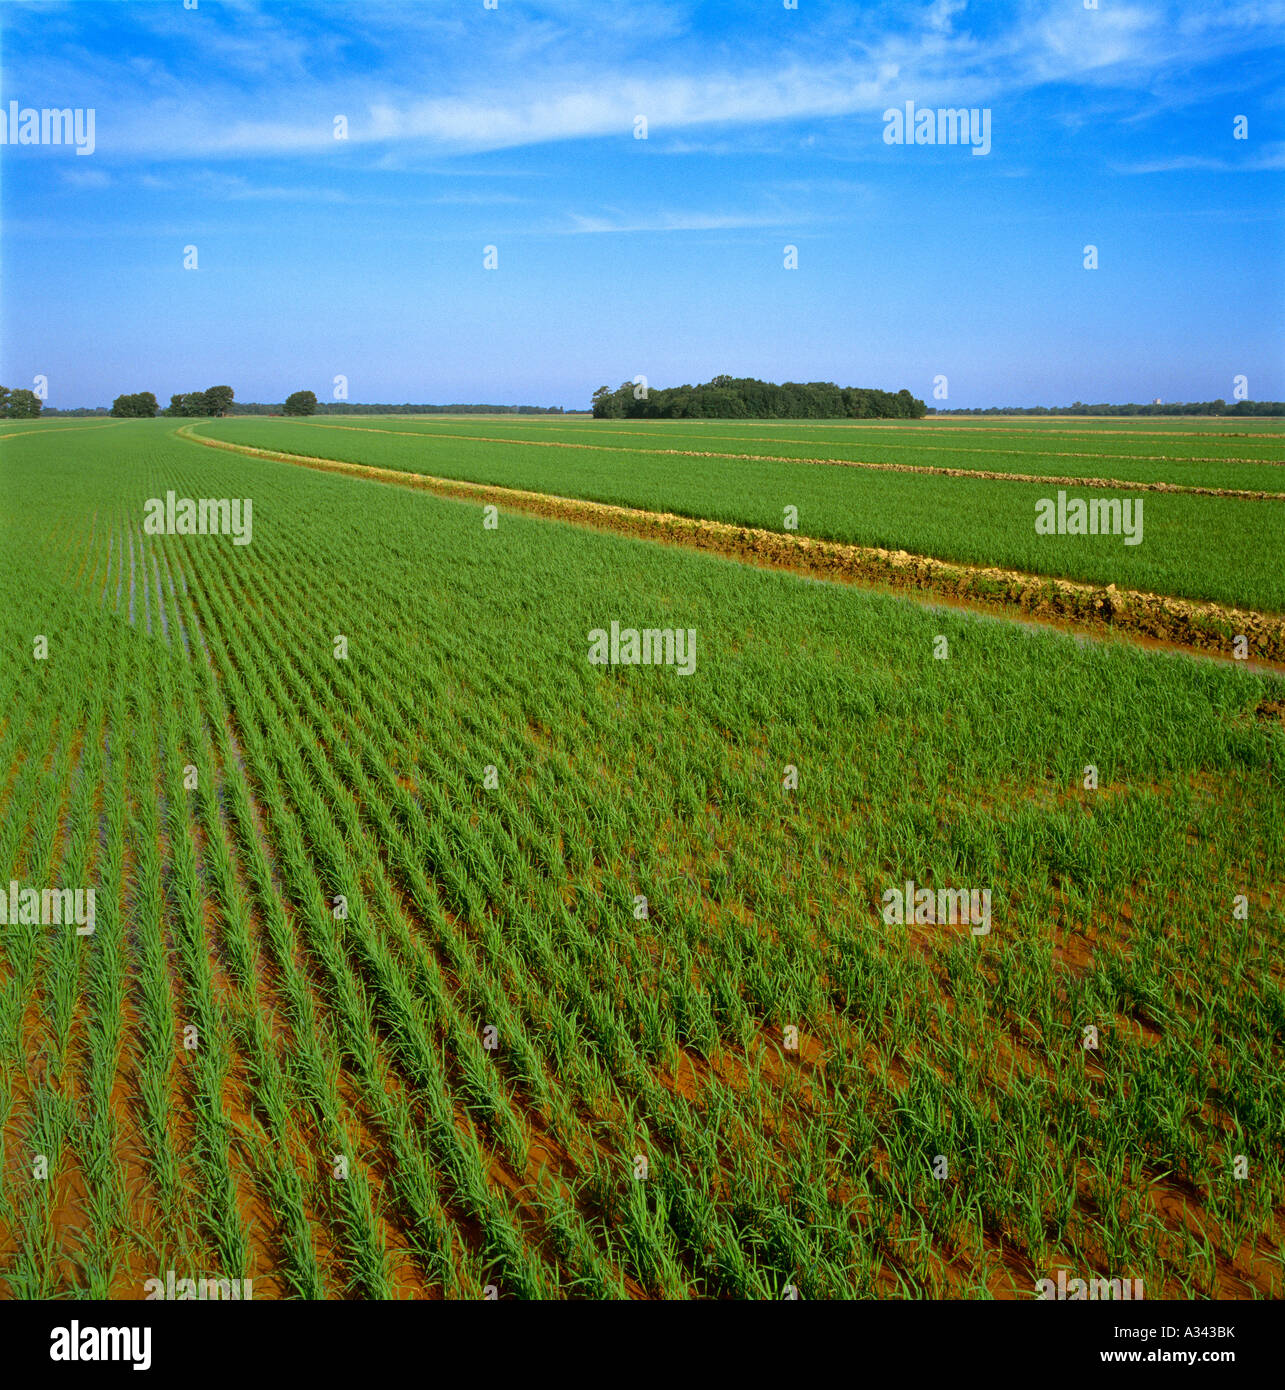 Agriculture - A large field of early growth rice plants during flood (irrigated) stage  / near Parkin, Arkansas, USA. Stock Photo